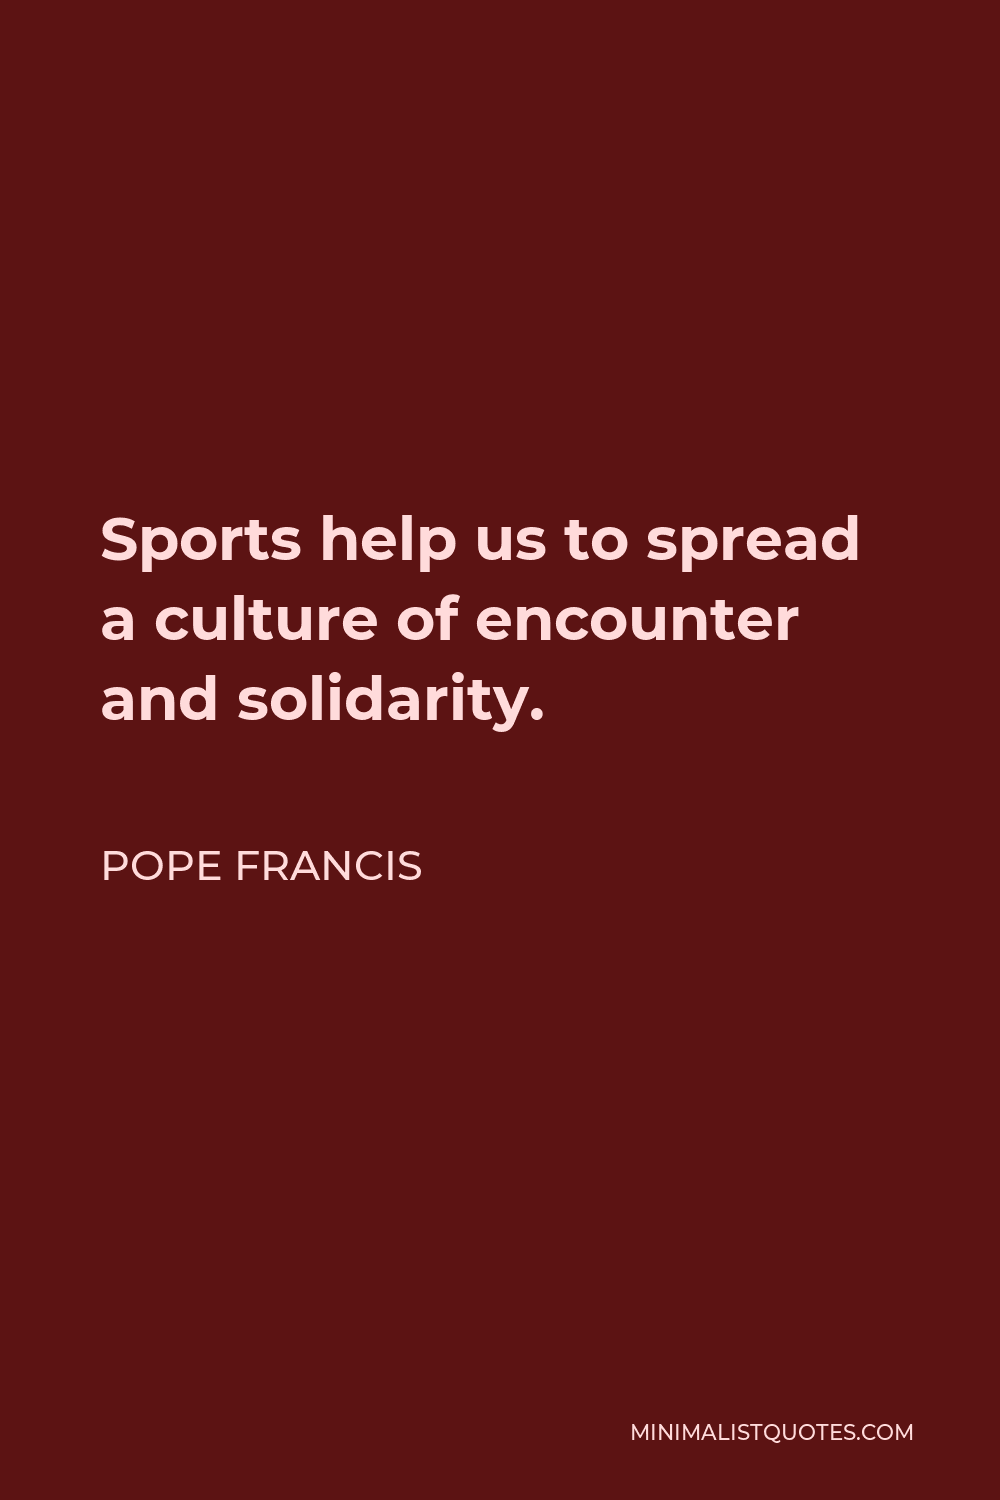 Pope Francis Quote - Sports help us to spread a culture of encounter and solidarity.